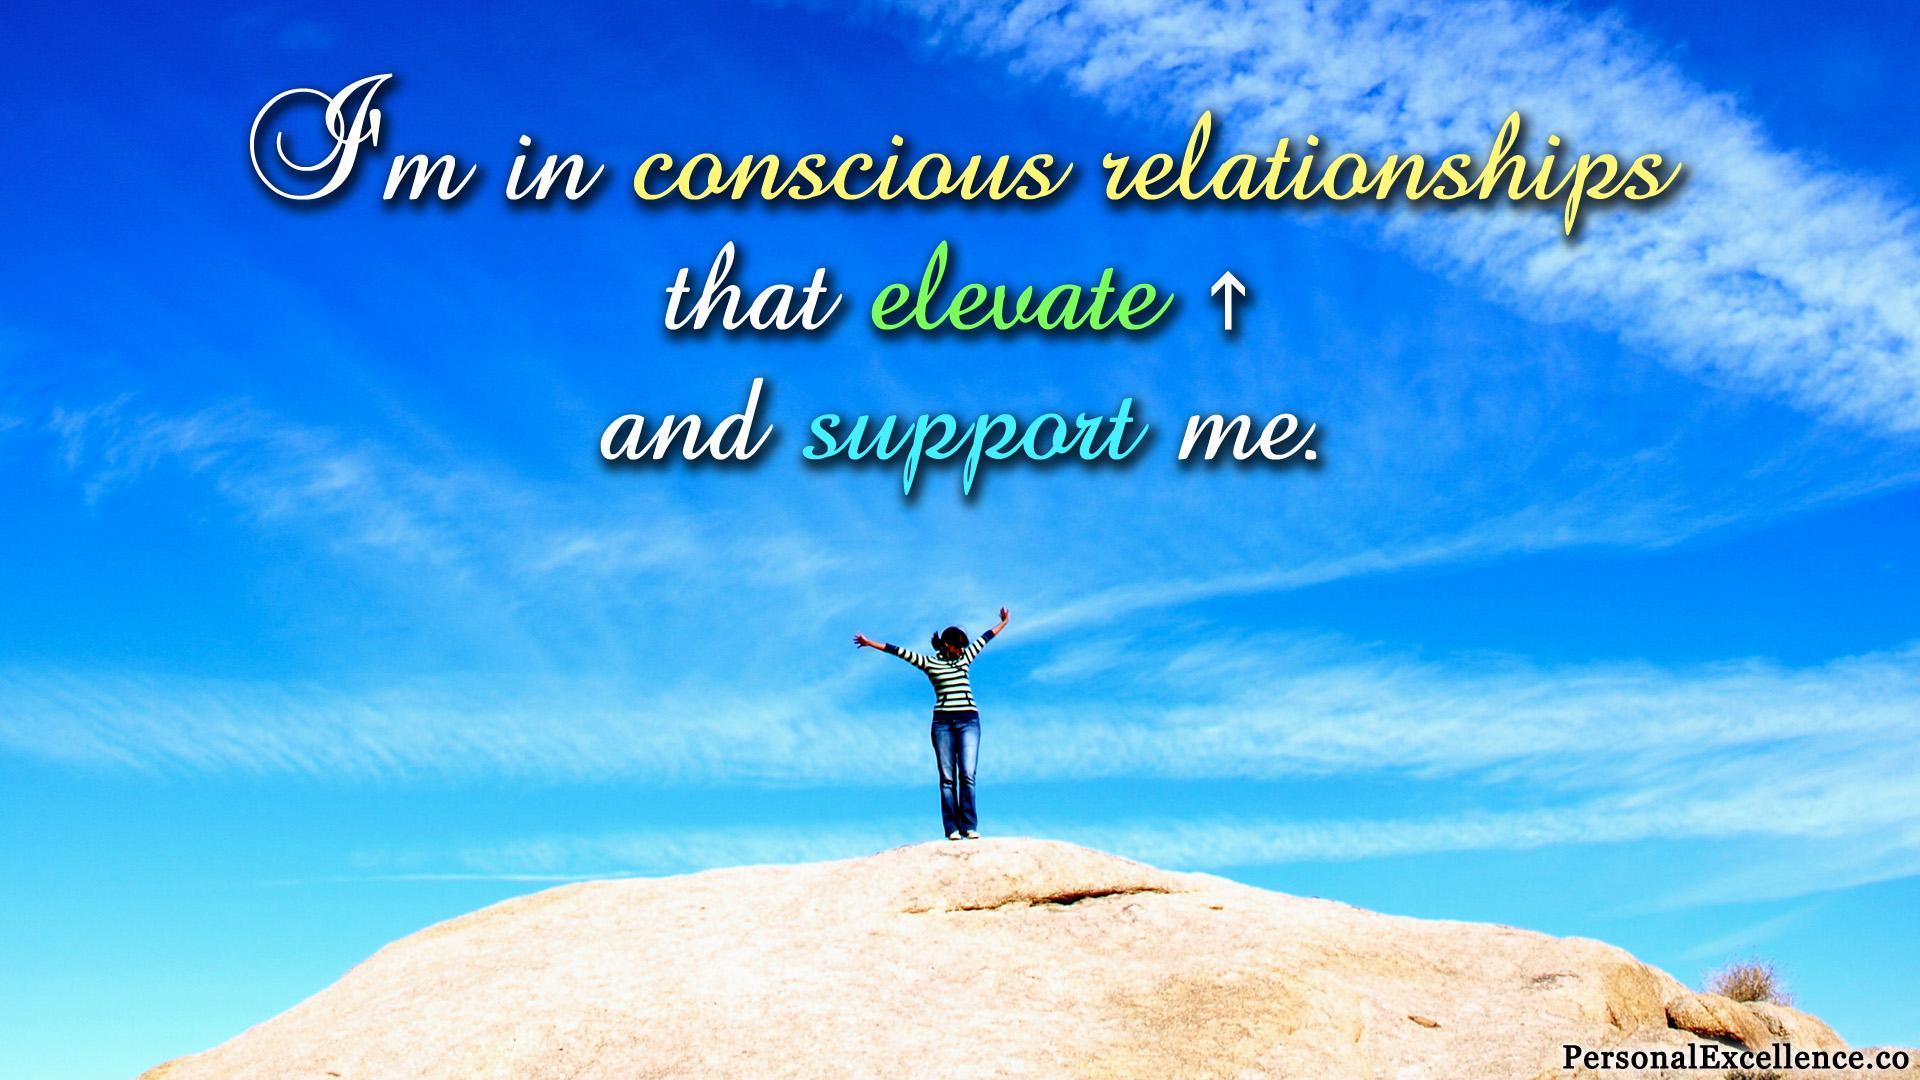 Affirmation Challenge Day 9 [Relationships]: 'I'm in conscious relationships that elevate and support me.'